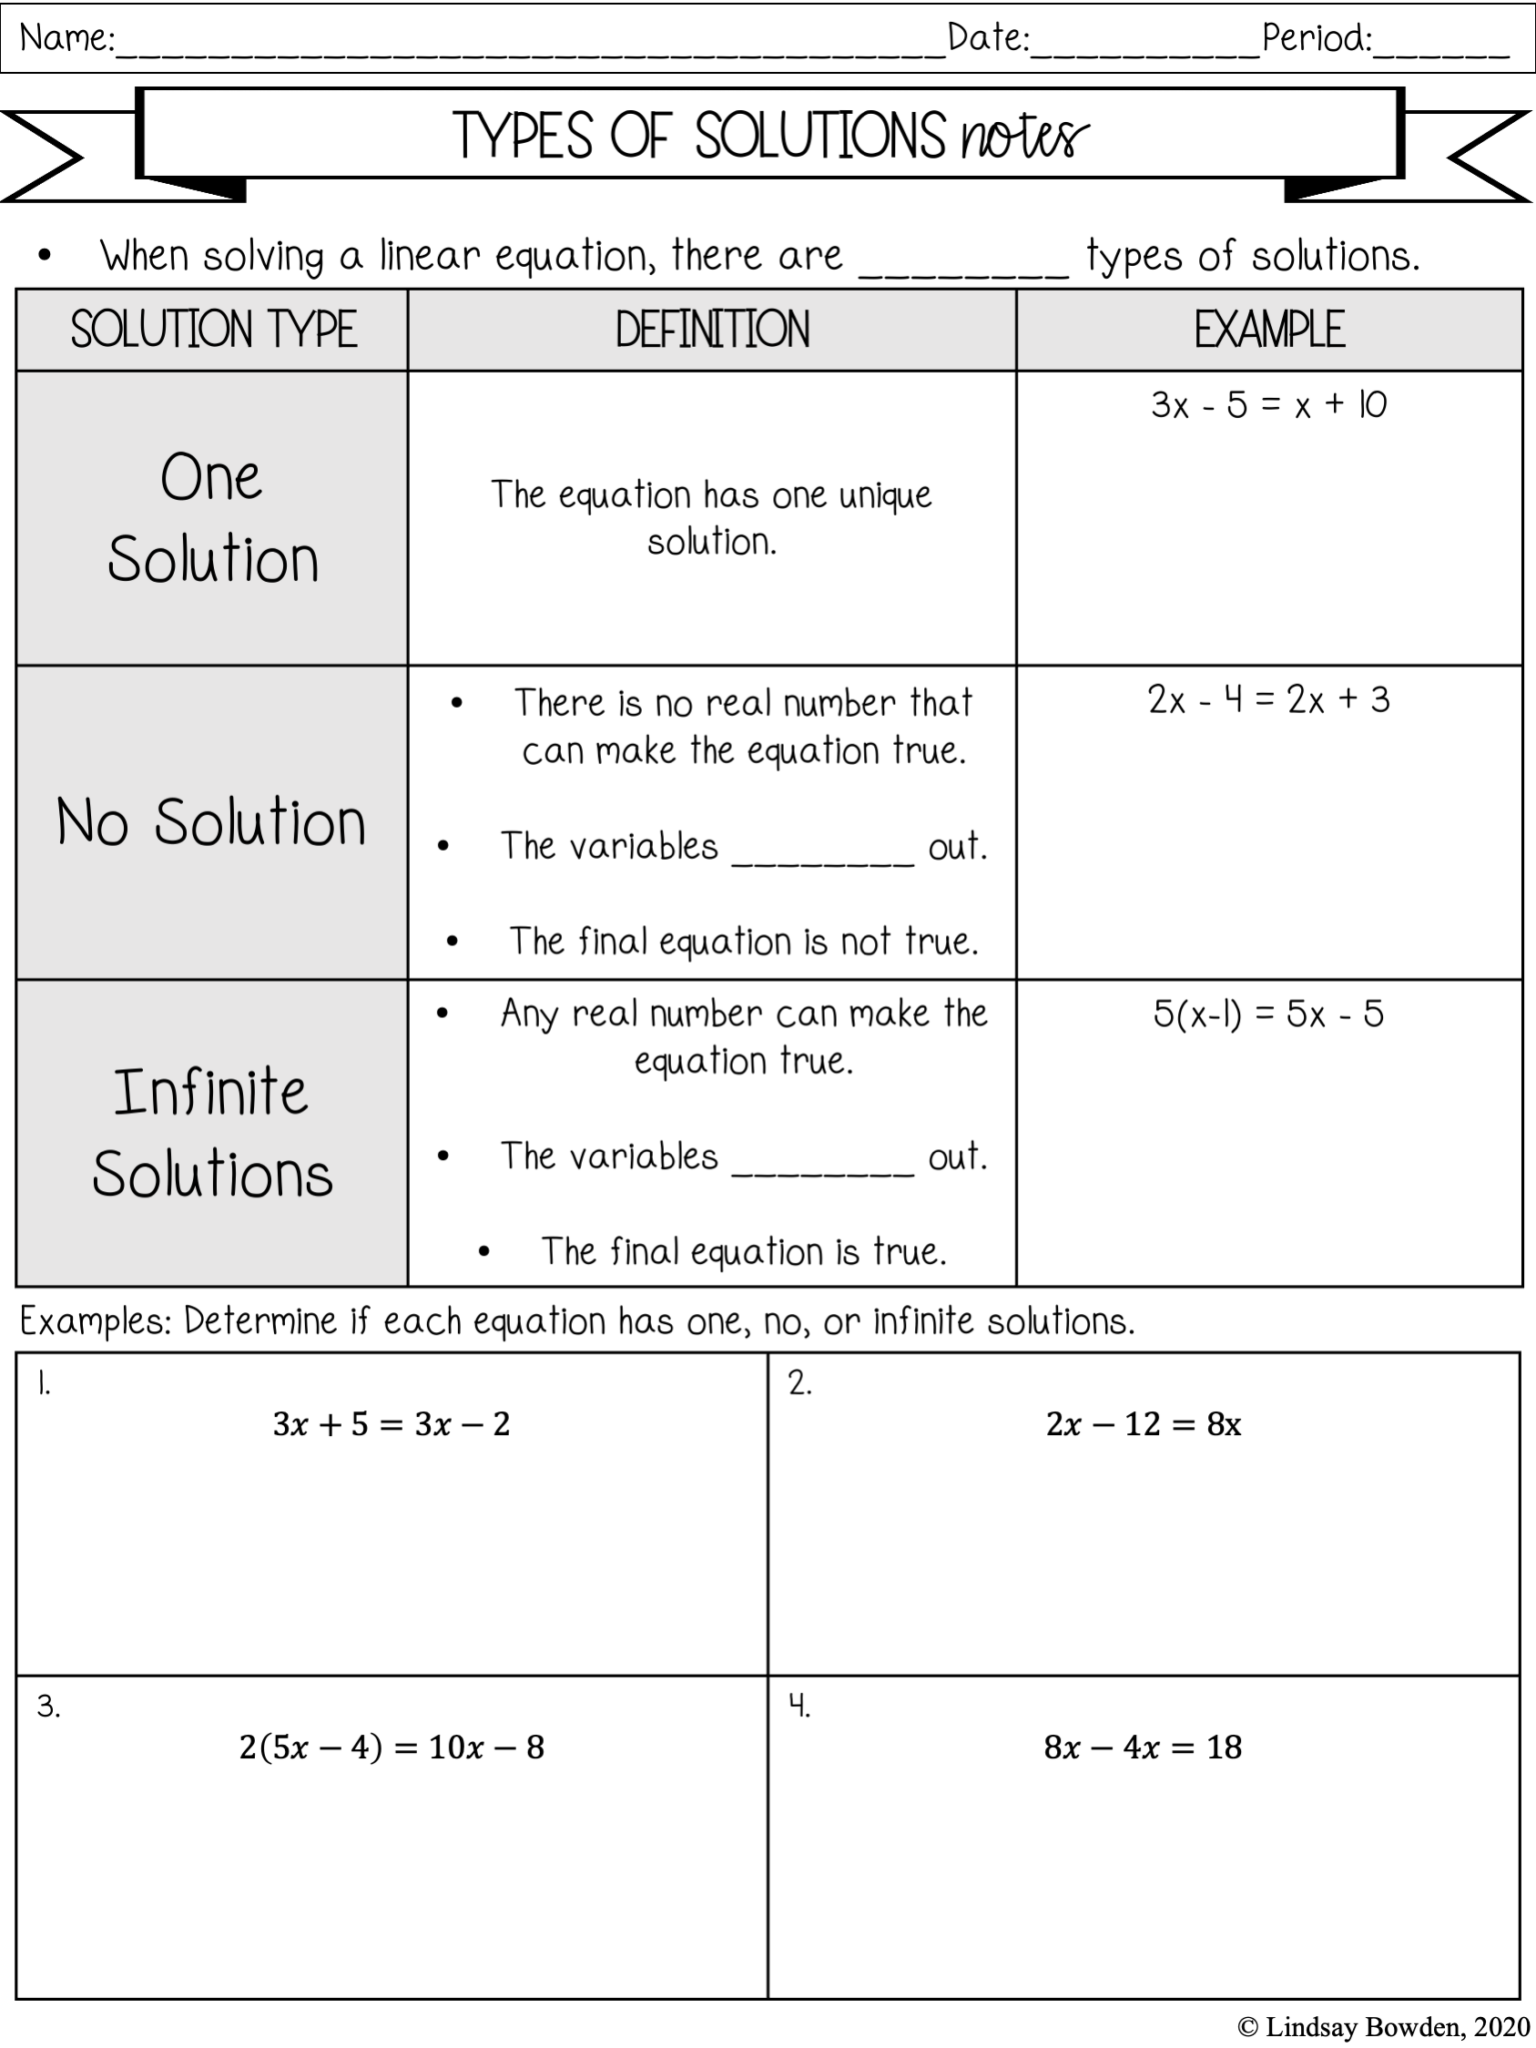 Types Of Solutions Notes And Worksheets Lindsay Bowden